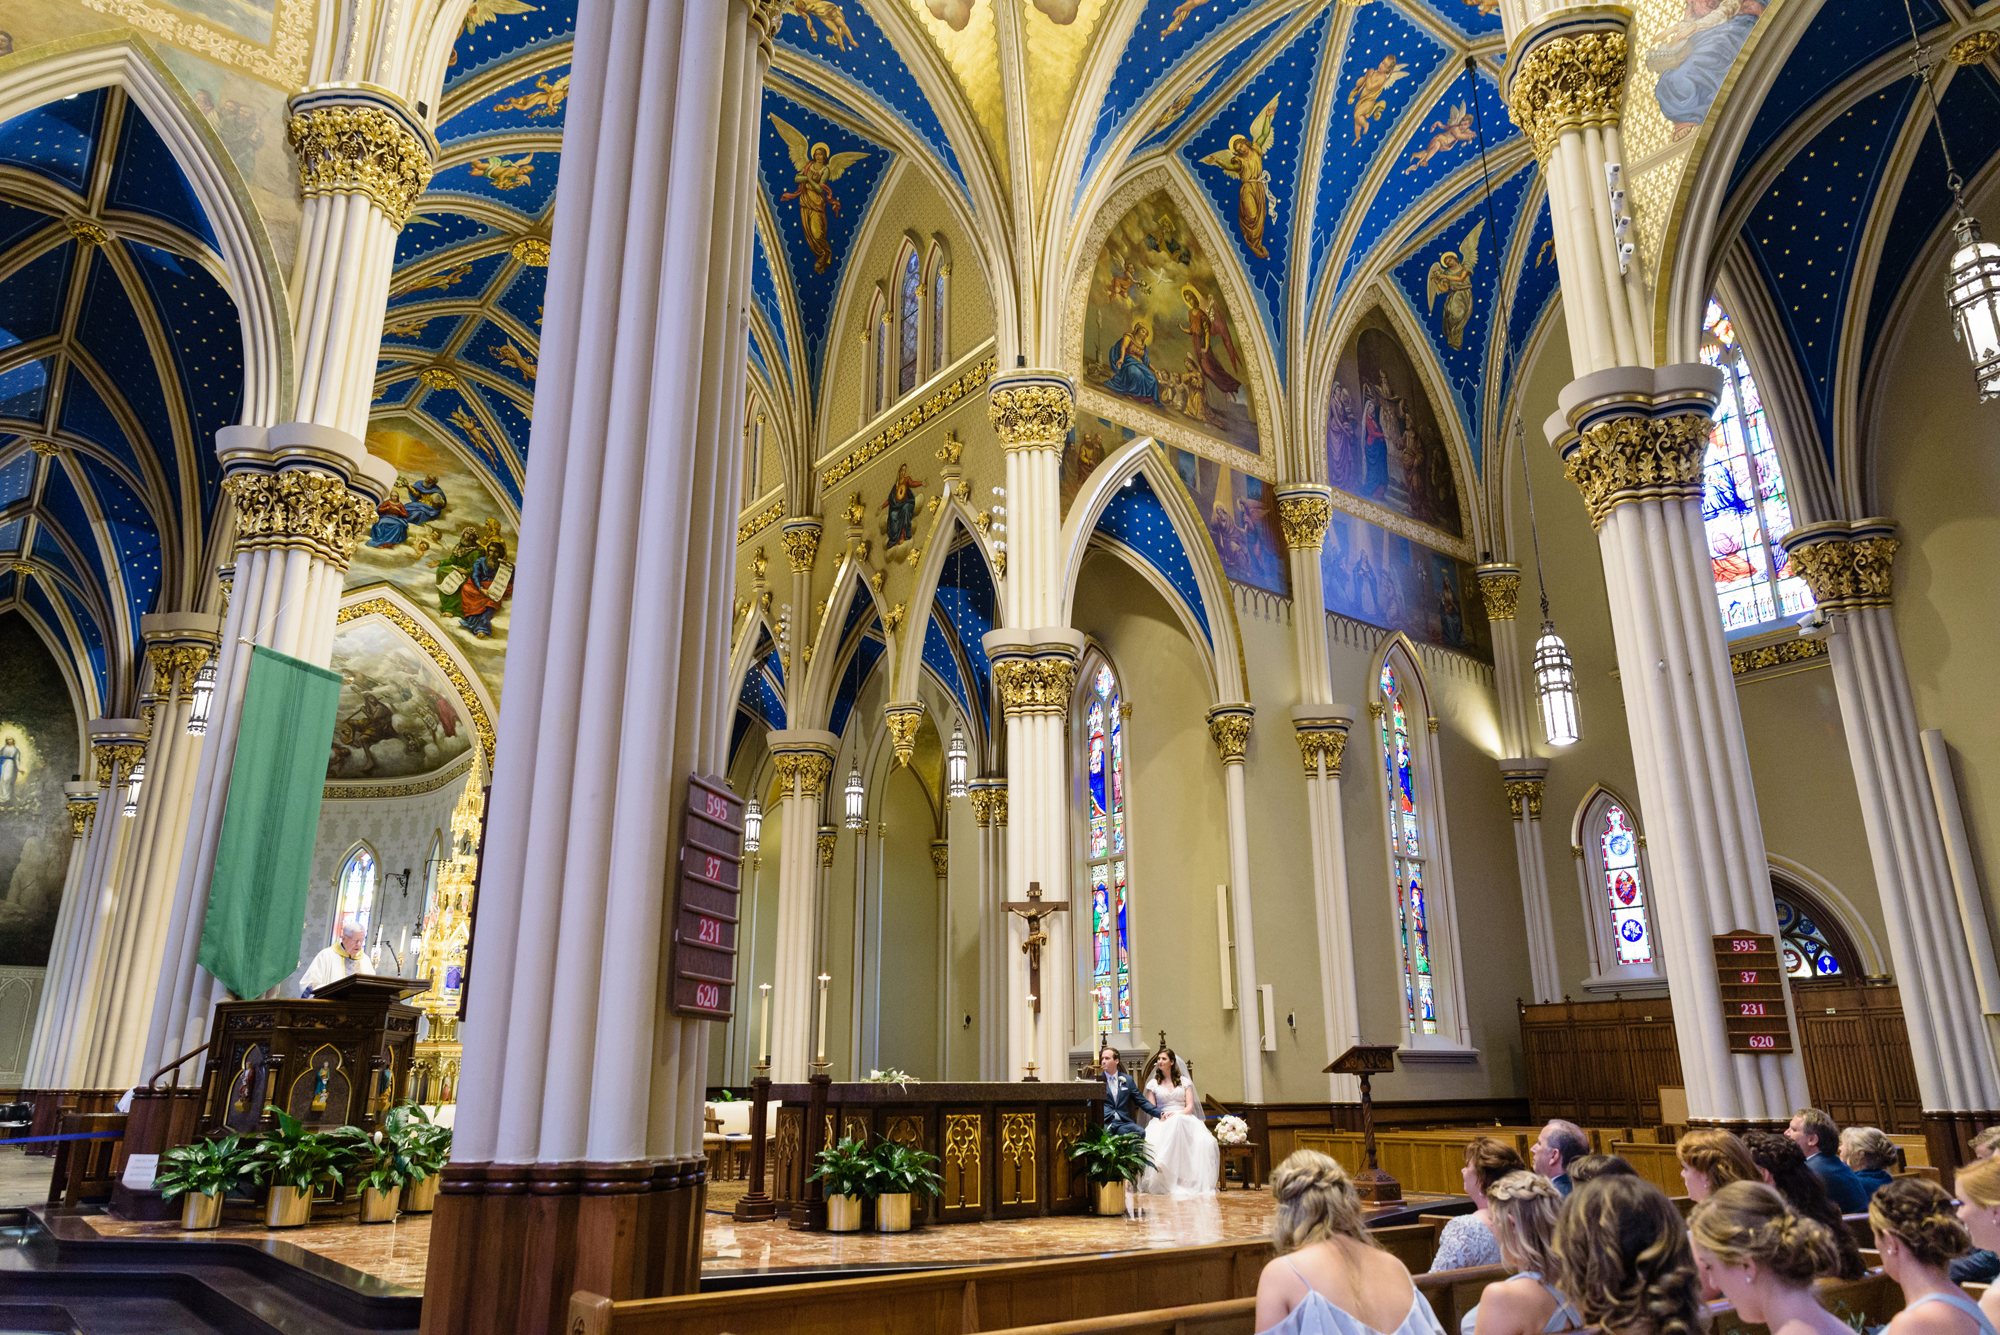 Wedding ceremony at the Basilica of the Sacred Heart on the campus of the University of Notre Dame